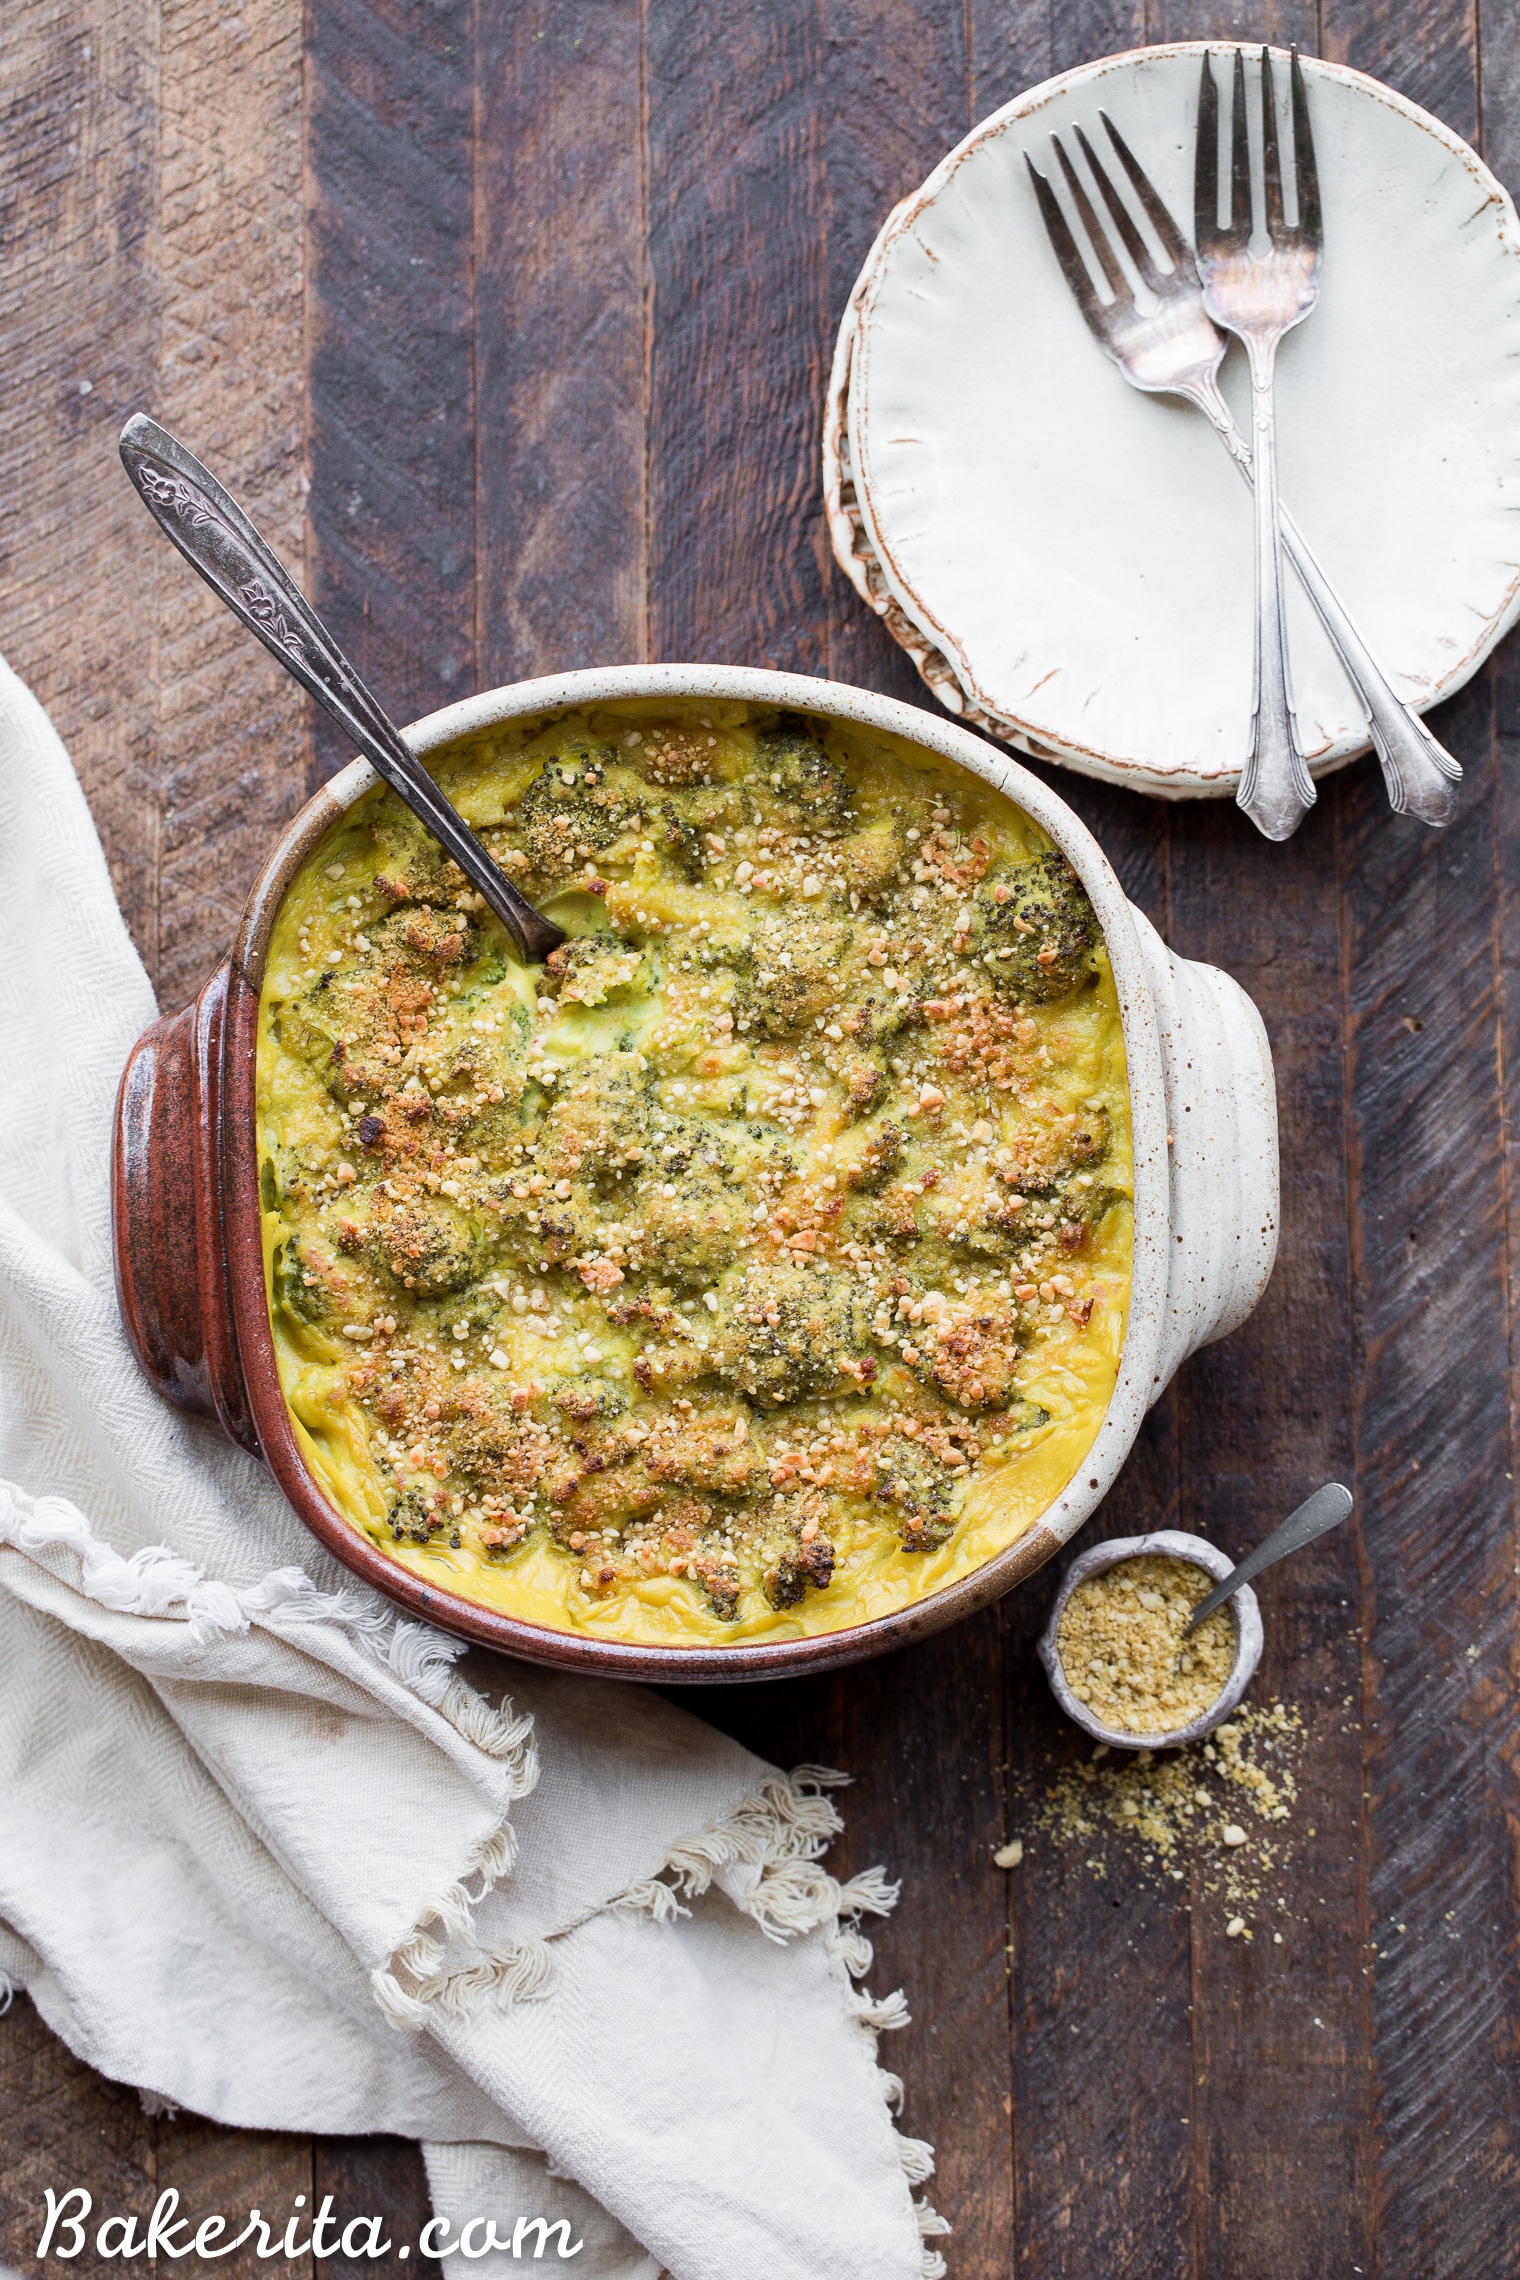 This Vegan Broccoli Gratin has a deliciously rich and "cheesy" sauce and is baked until golden brown on top. It's the perfect gluten-free and paleo side dish to serve with your Thanksgiving feast, or to enjoy any night of the week.